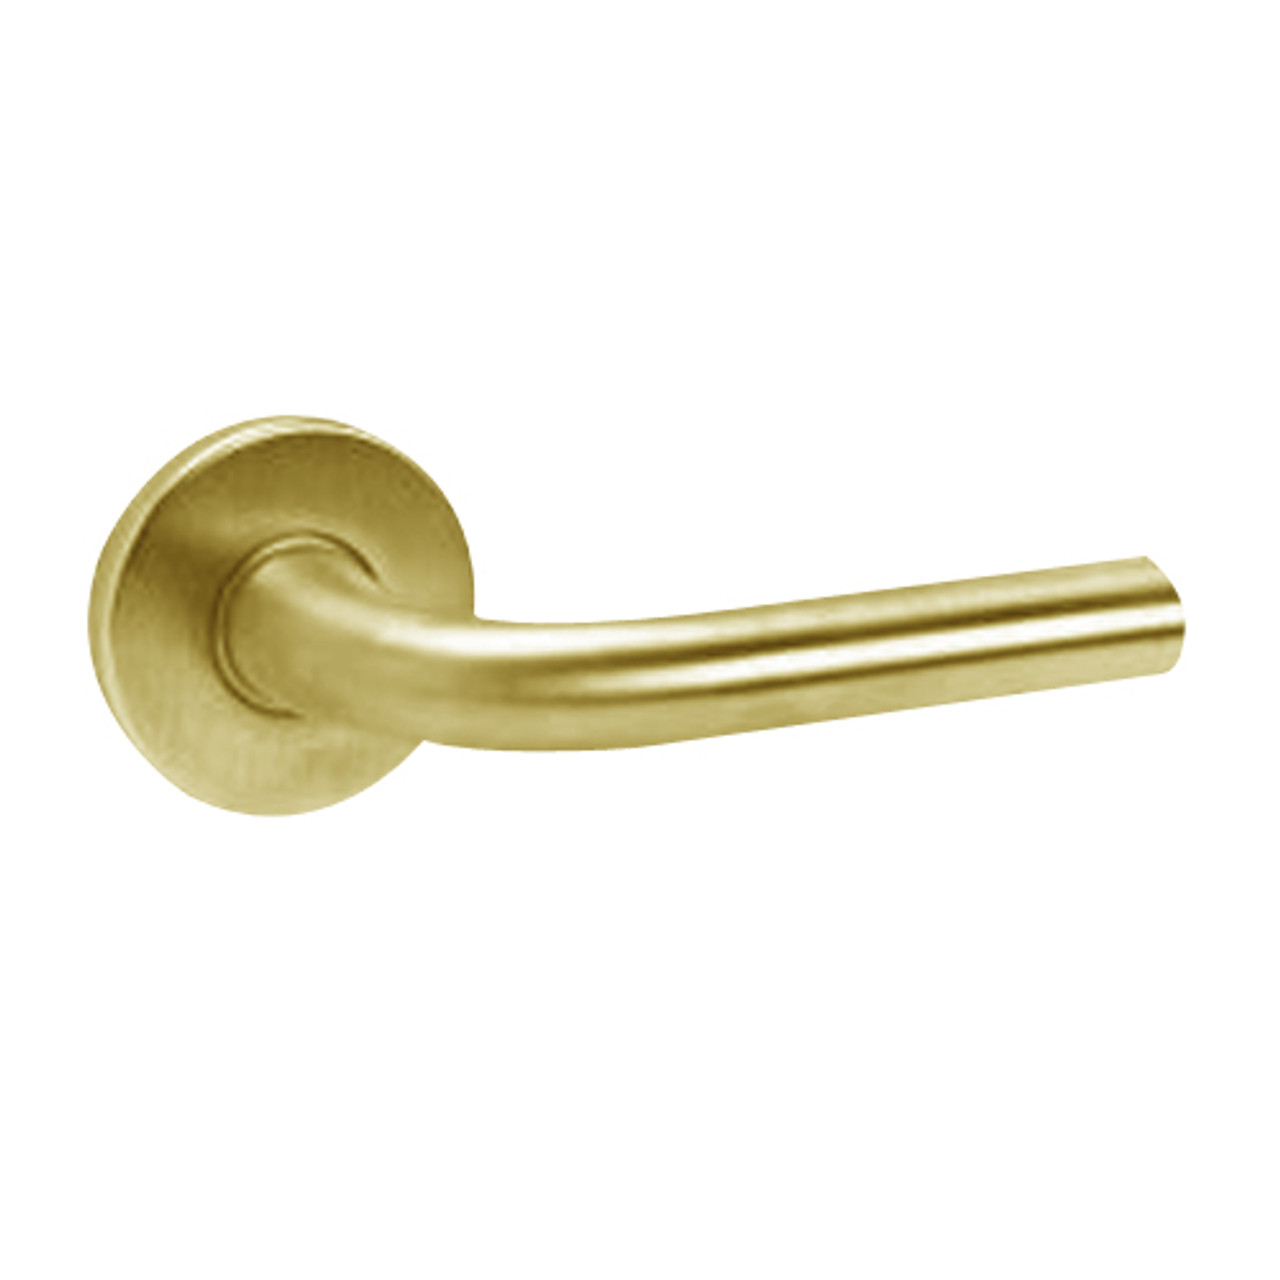 ML2056-RWF-606-CL7 Corbin Russwin ML2000 Series IC 7-Pin Less Core Mortise Classroom Locksets with Regis Lever in Satin Brass